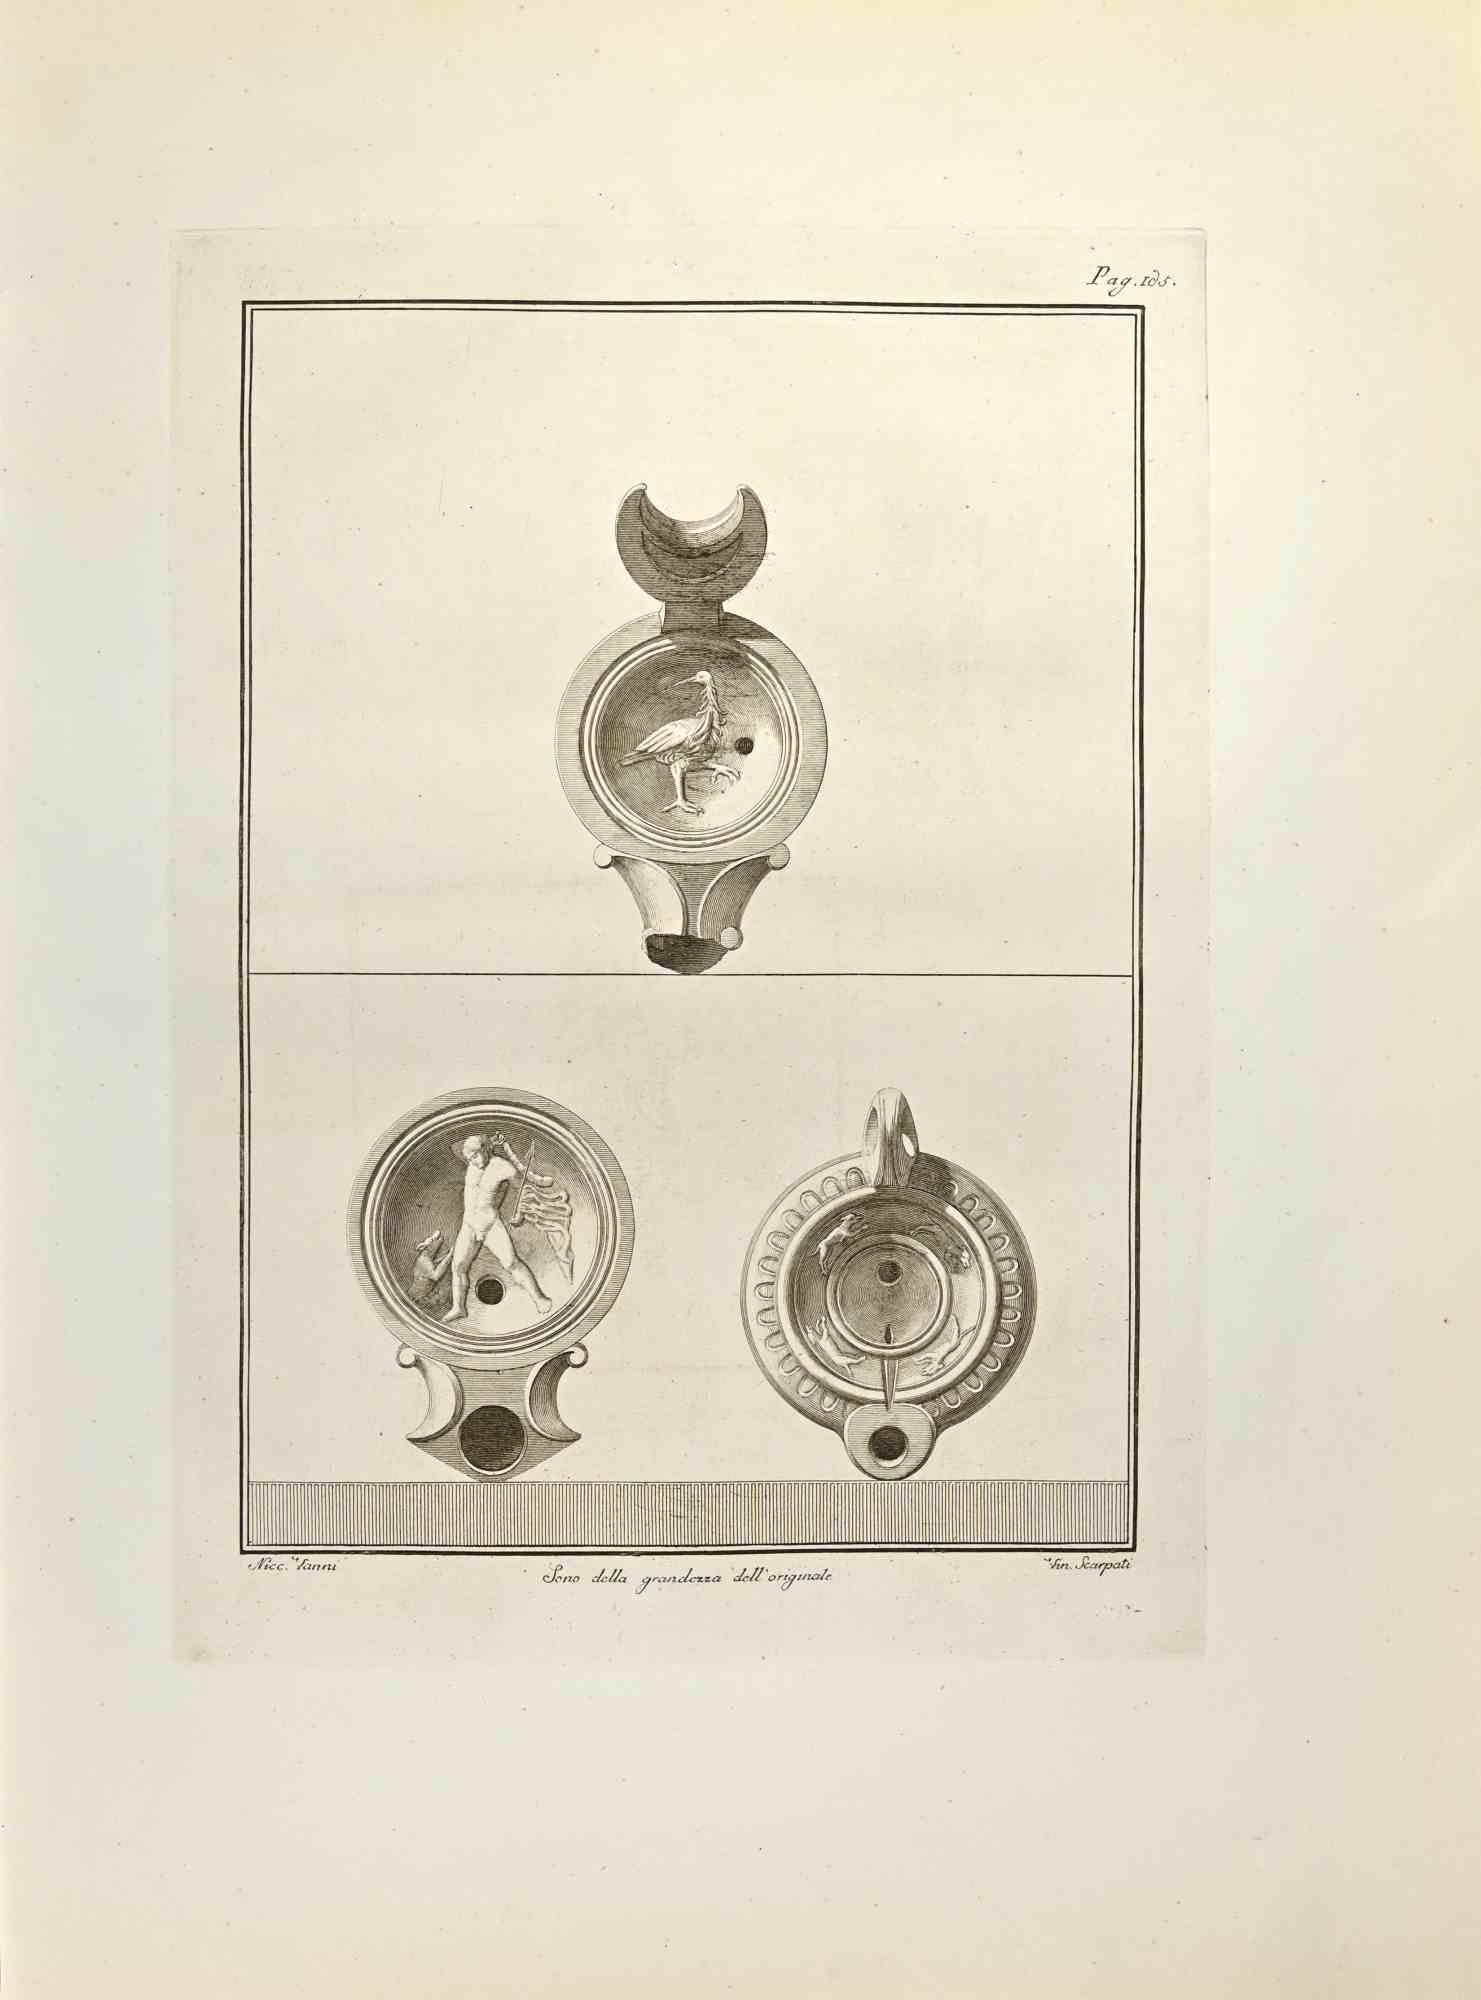 Vincenzo Scarpati Figurative Print - Oil Lamp With Hercules and Animals - Etching - 18th Century